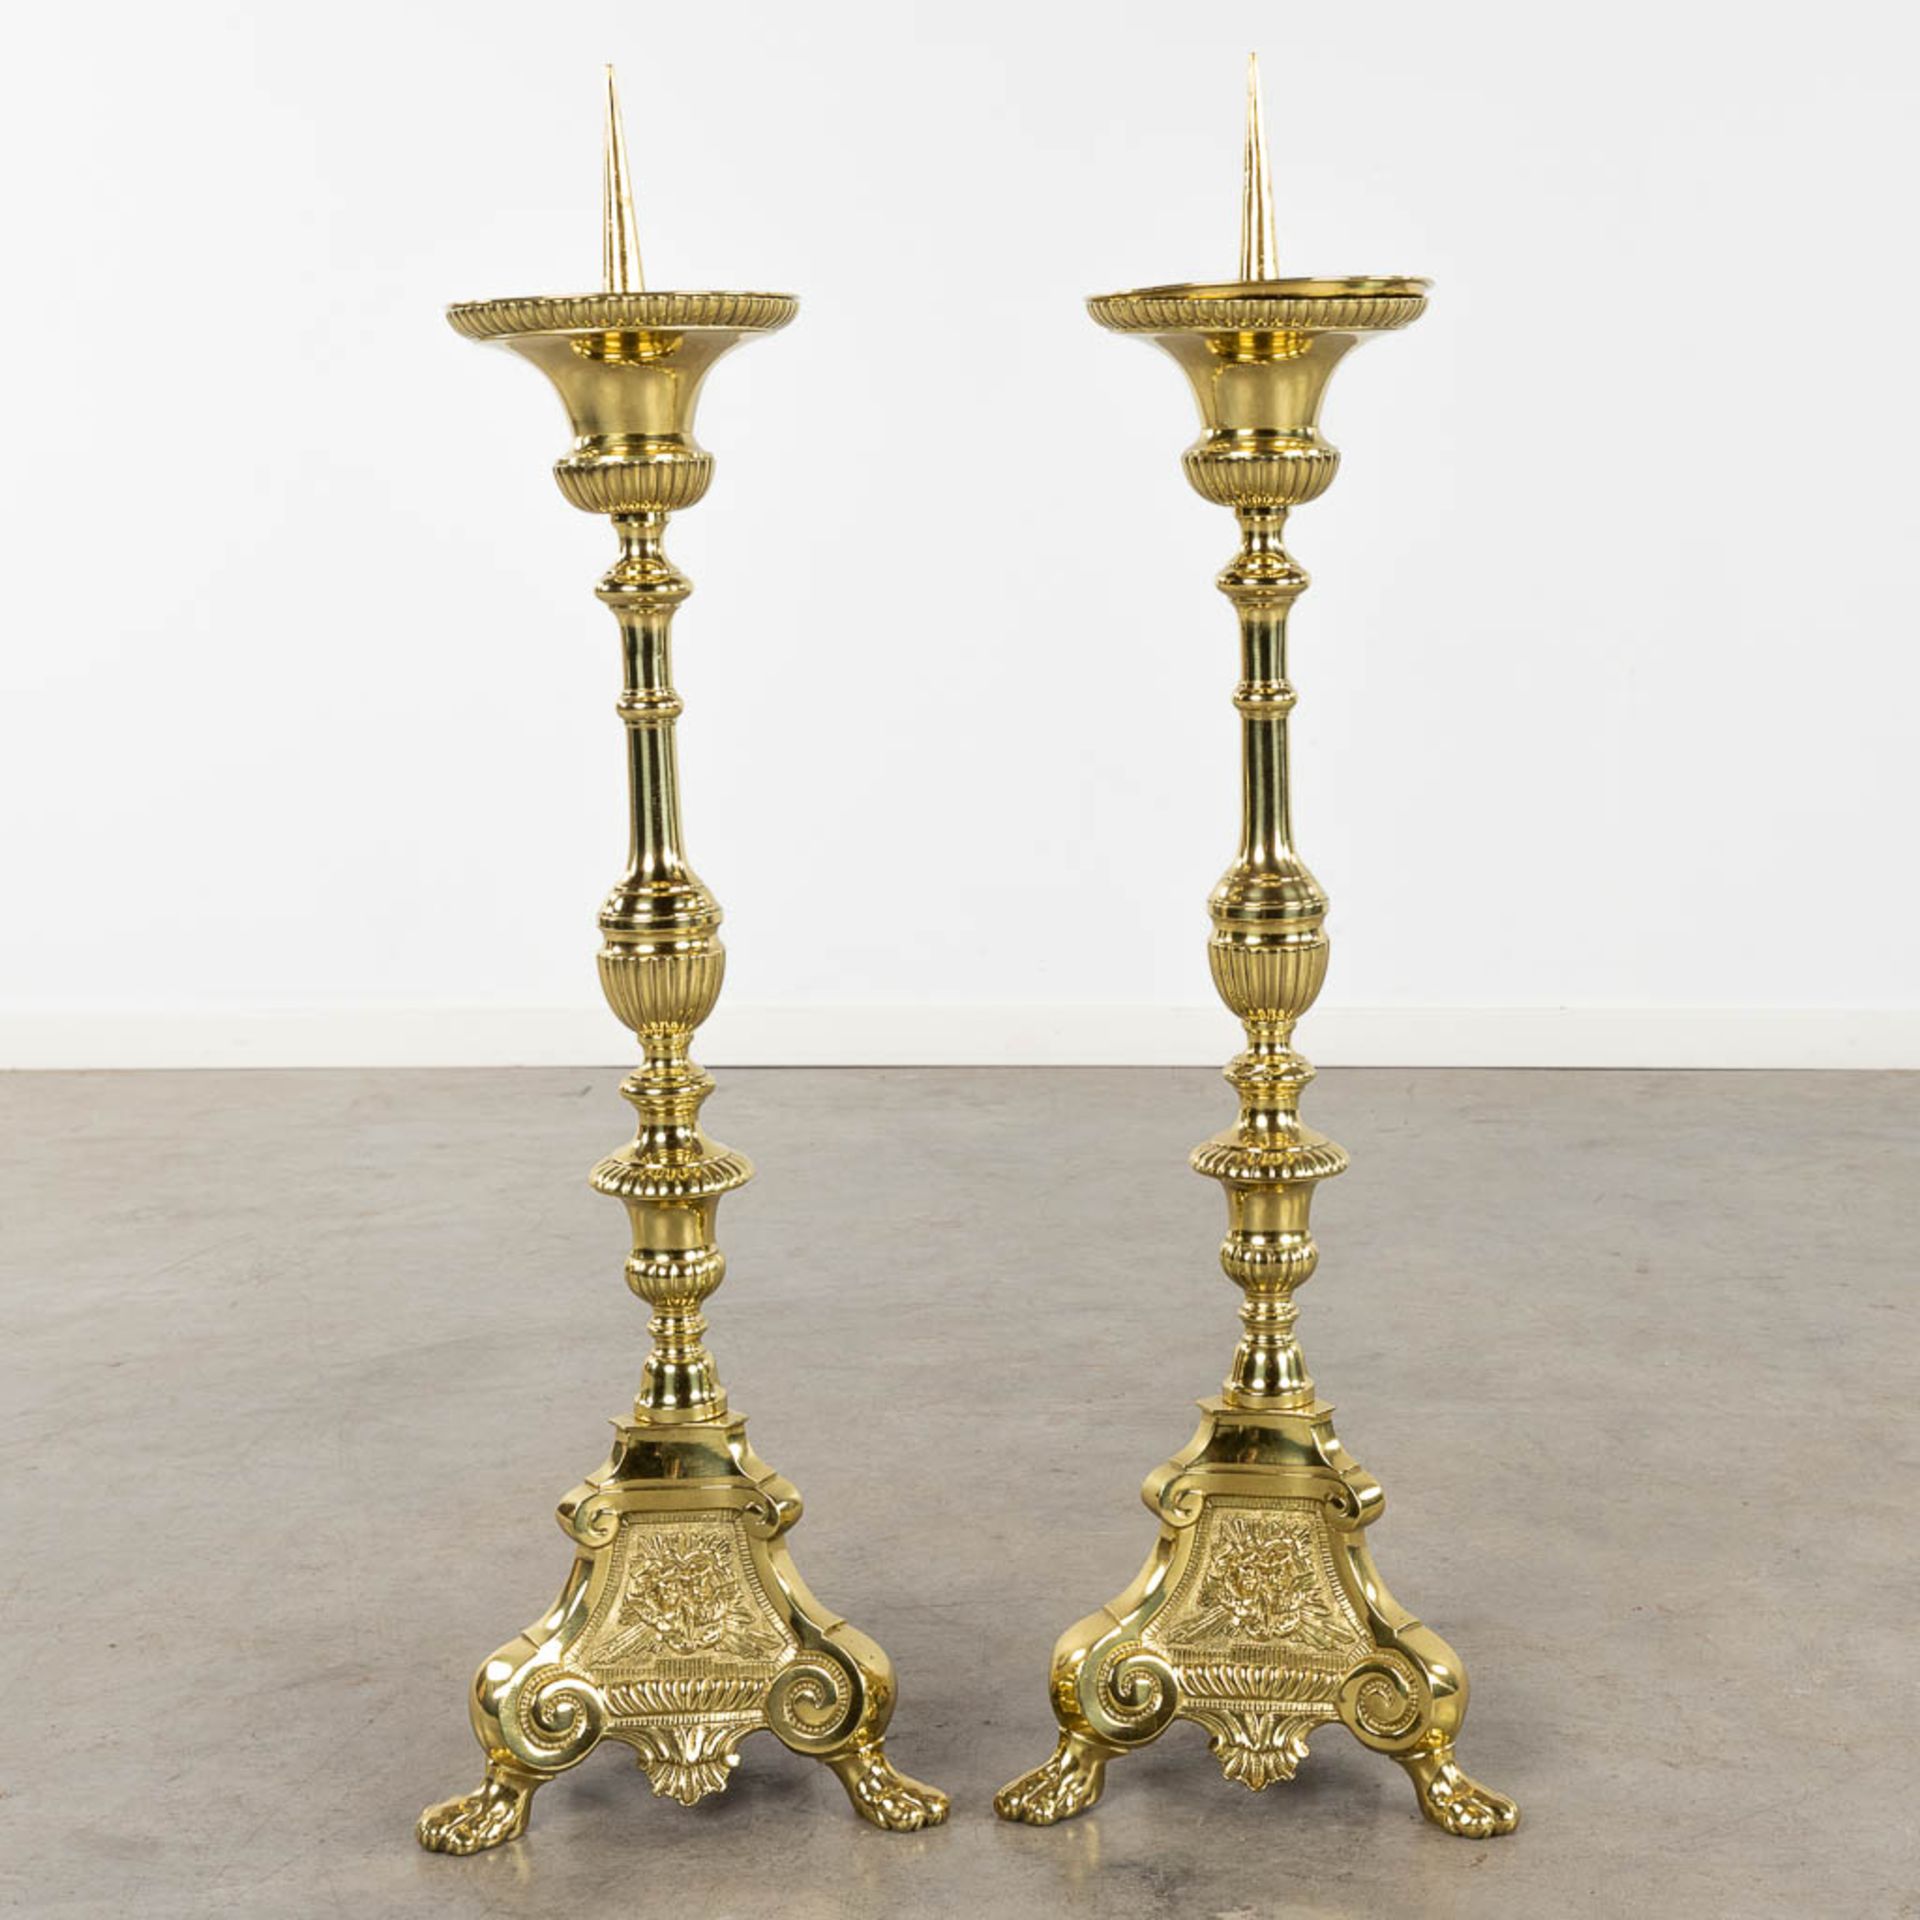 A pair of church candlesticks or candle holders polished bronze. 19th C. (D:24 x W:27 x H:88 cm) - Image 5 of 15